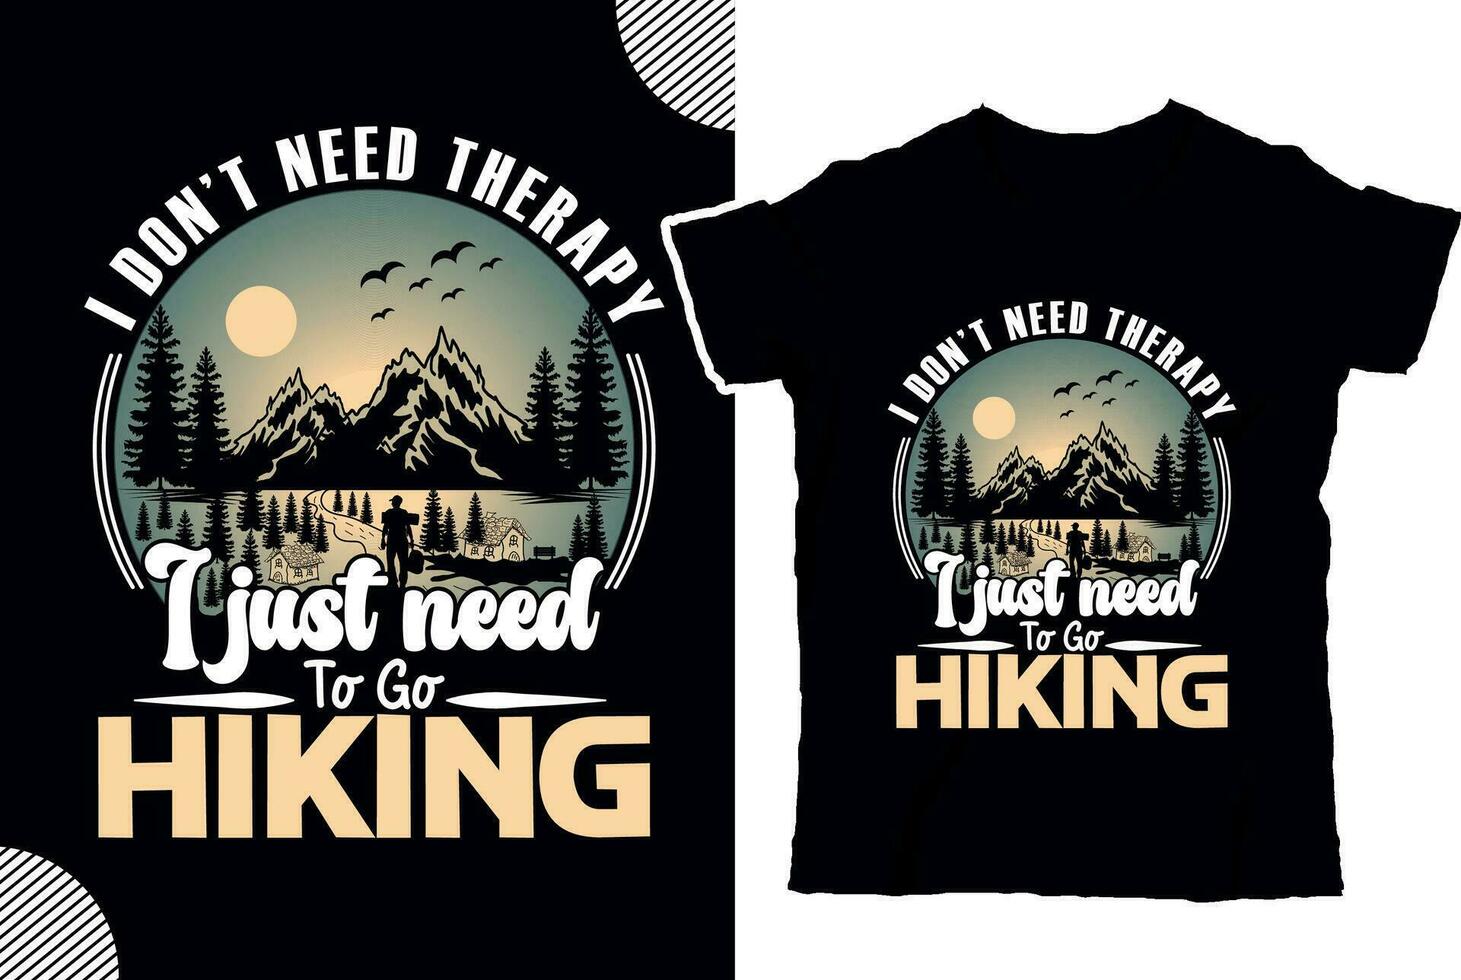 I just need to go hiking, t shirt design vector